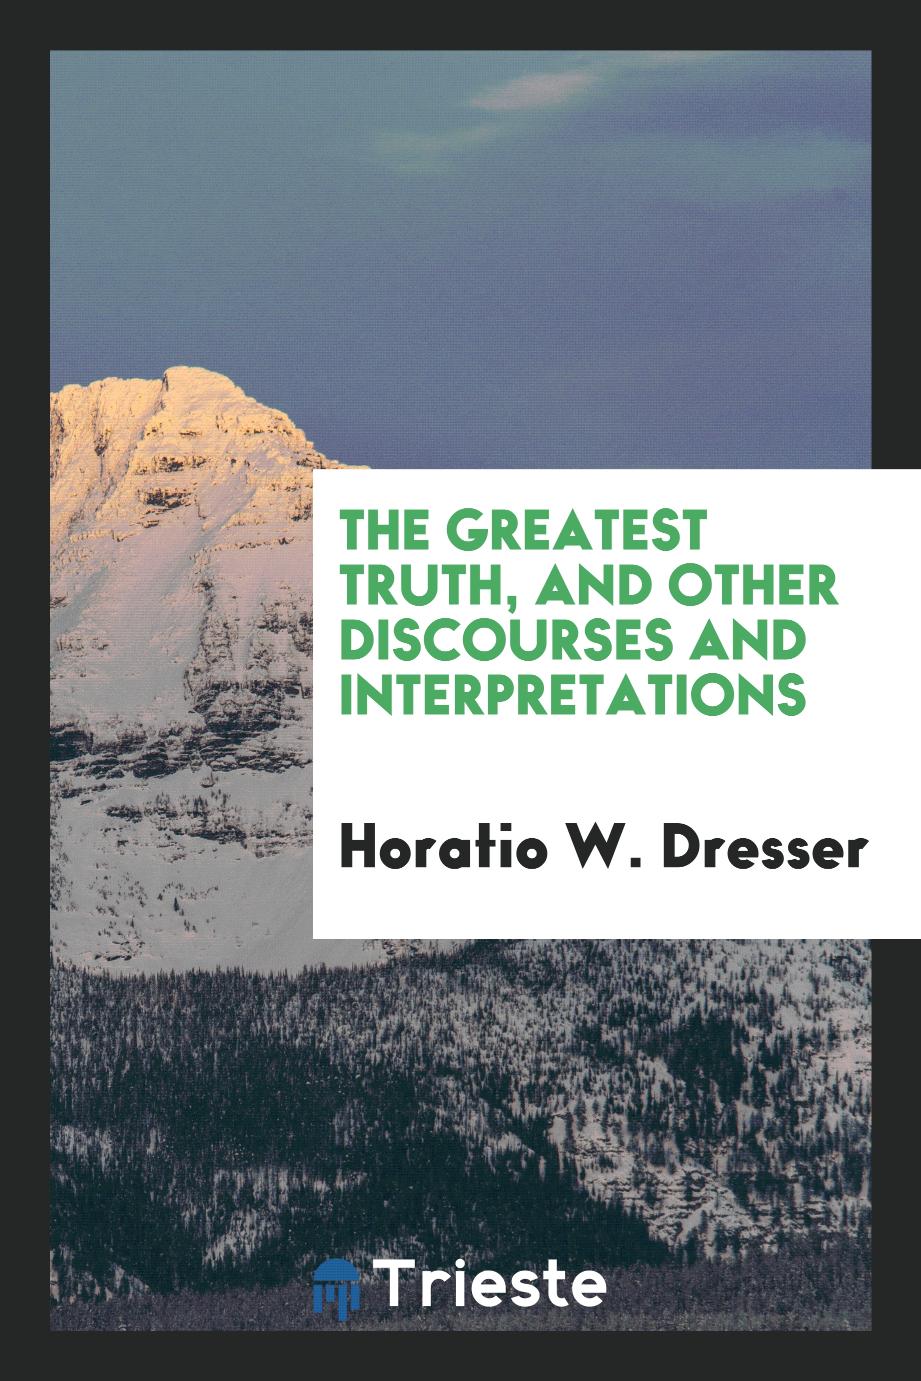 The greatest truth, and other discourses and interpretations